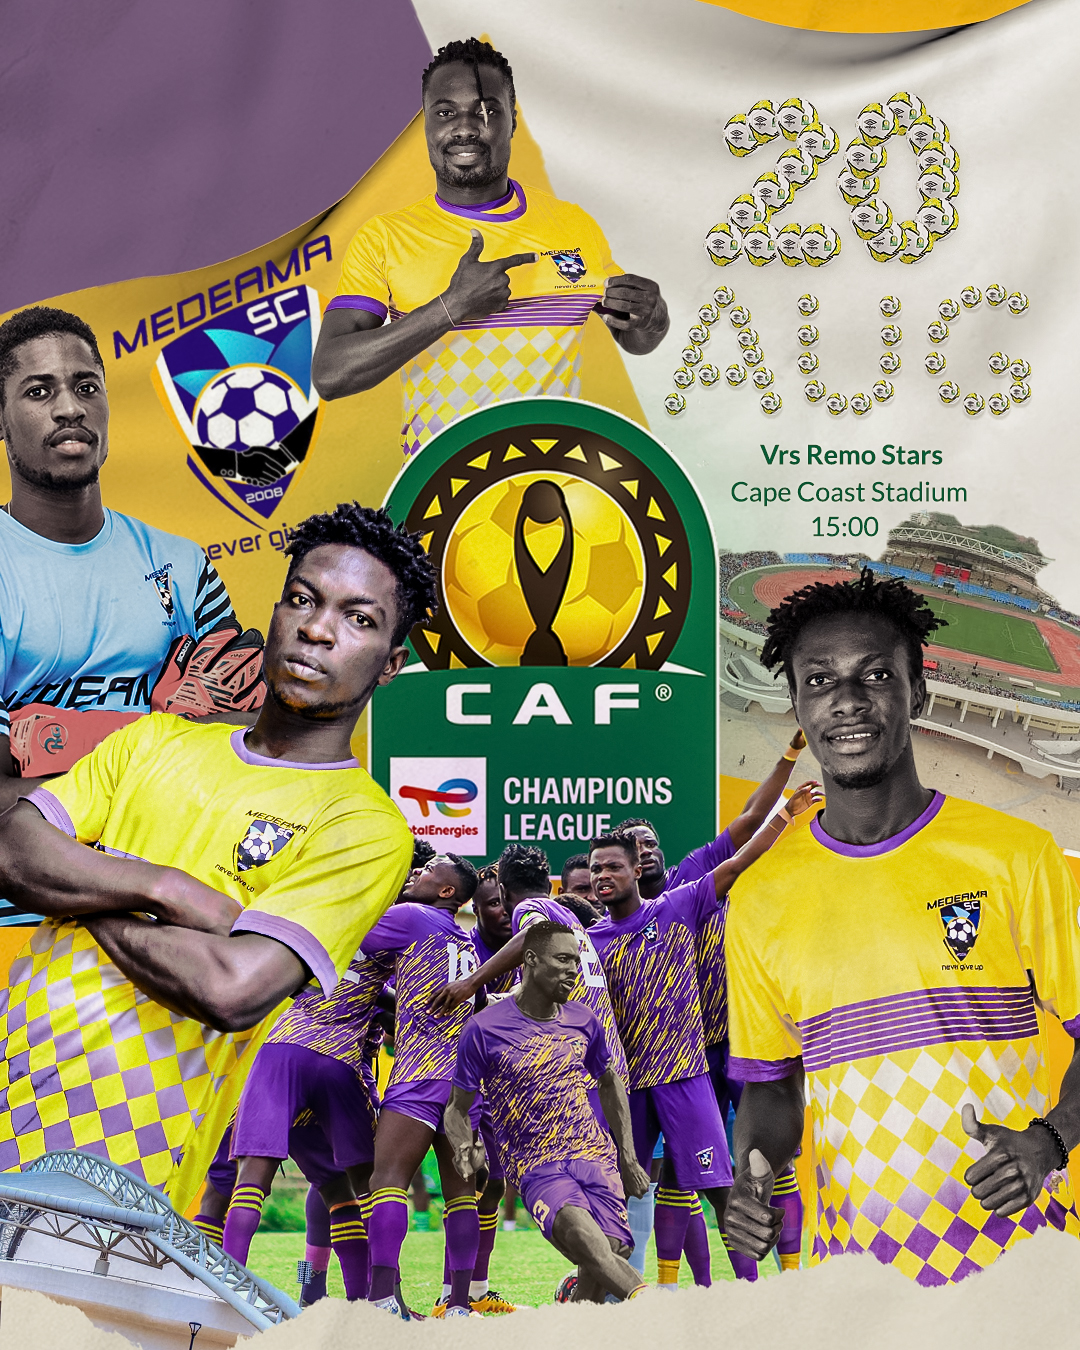 GFA urges Medeama SC to go for victory: Supports African campaign with $30,000